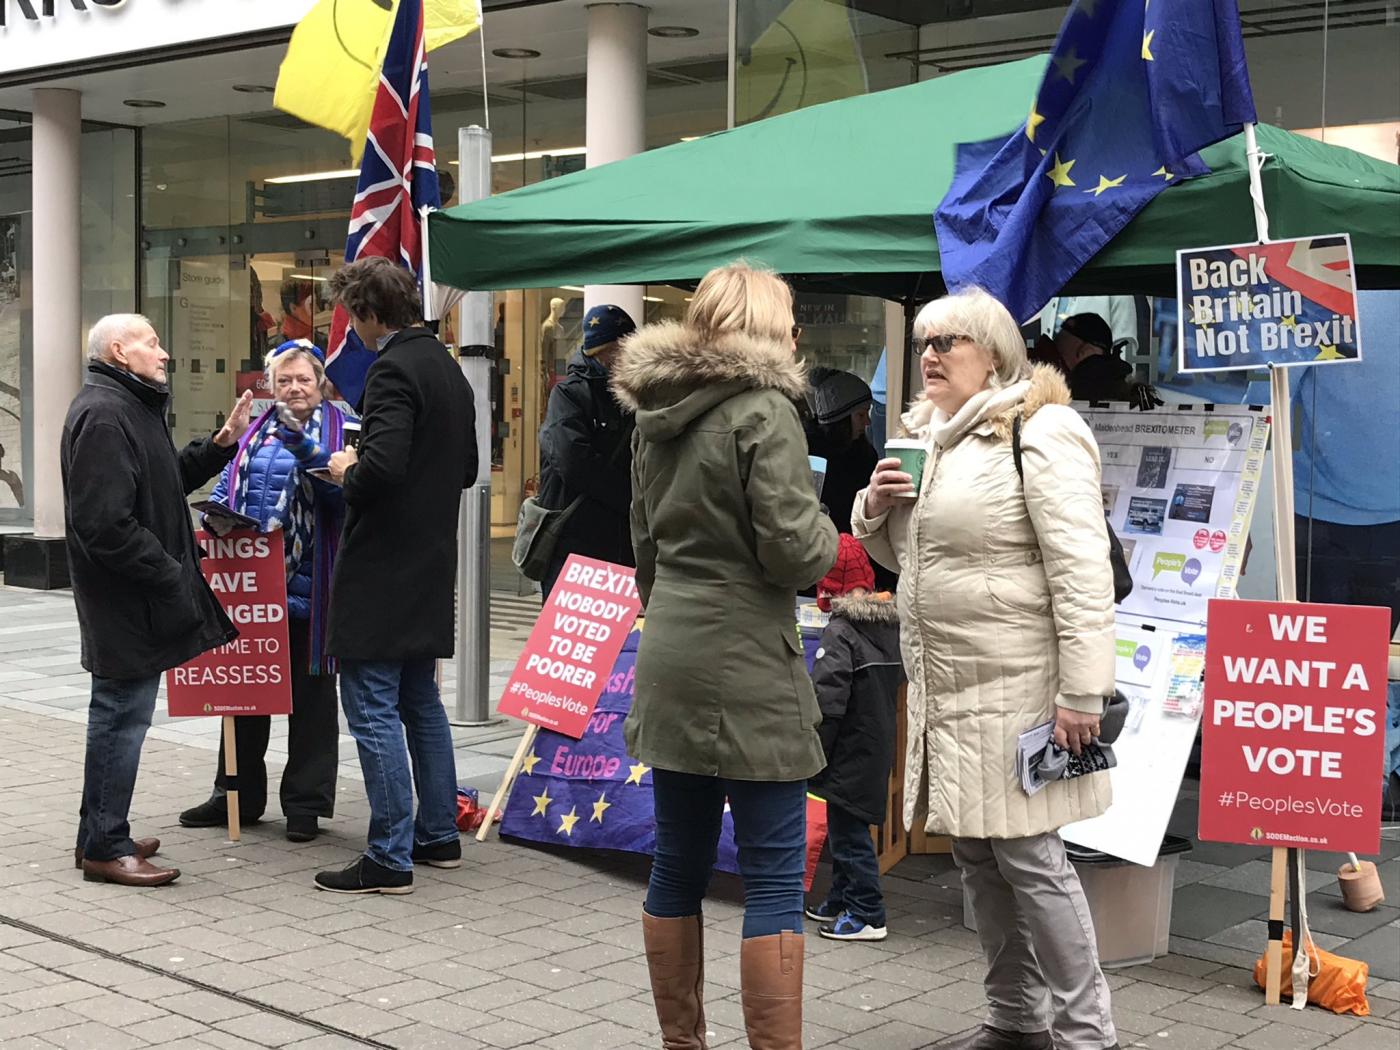 People's Vote street stall in Maidenhead